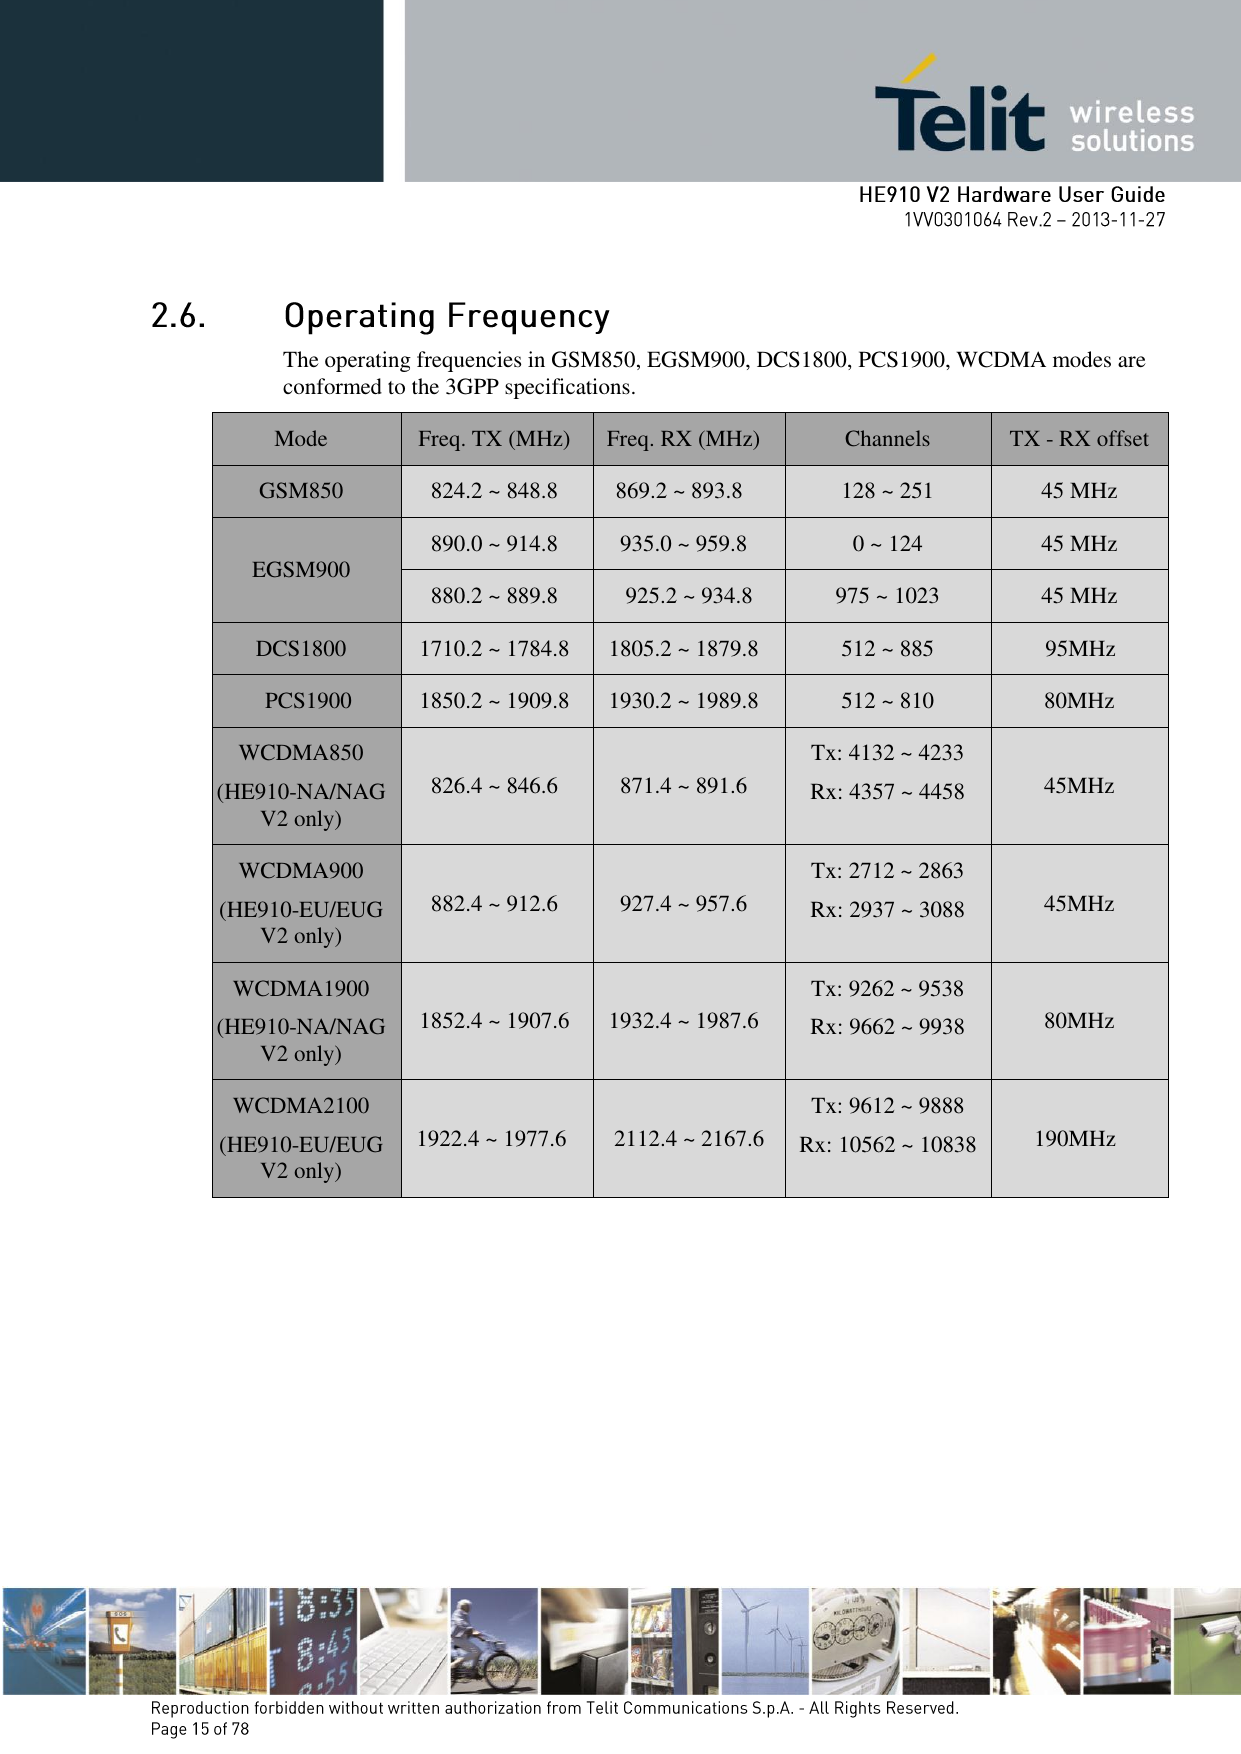        The operating frequencies in GSM850, EGSM900, DCS1800, PCS1900, WCDMA modes are conformed to the 3GPP specifications. Mode Freq. TX (MHz) Freq. RX (MHz) Channels TX - RX offset GSM850 824.2 ~ 848.8  869.2 ~ 893.8 128 ~ 251 45 MHz EGSM900 890.0 ~ 914.8 935.0 ~ 959.8 0 ~ 124 45 MHz 880.2 ~ 889.8 925.2 ~ 934.8 975 ~ 1023 45 MHz DCS1800 1710.2 ~ 1784.8 1805.2 ~ 1879.8 512 ~ 885 95MHz PCS1900 1850.2 ~ 1909.8 1930.2 ~ 1989.8 512 ~ 810 80MHz WCDMA850 (HE910-NA/NAG V2 only) 826.4 ~ 846.6 871.4 ~ 891.6 Tx: 4132 ~ 4233 Rx: 4357 ~ 4458 45MHz WCDMA900 (HE910-EU/EUG V2 only) 882.4 ~ 912.6 927.4 ~ 957.6 Tx: 2712 ~ 2863 Rx: 2937 ~ 3088 45MHz WCDMA1900 (HE910-NA/NAG V2 only) 1852.4 ~ 1907.6 1932.4 ~ 1987.6 Tx: 9262 ~ 9538 Rx: 9662 ~ 9938 80MHz WCDMA2100 (HE910-EU/EUG V2 only) 1922.4 ~ 1977.6 2112.4 ~ 2167.6 Tx: 9612 ~ 9888 Rx: 10562 ~ 10838 190MHz 